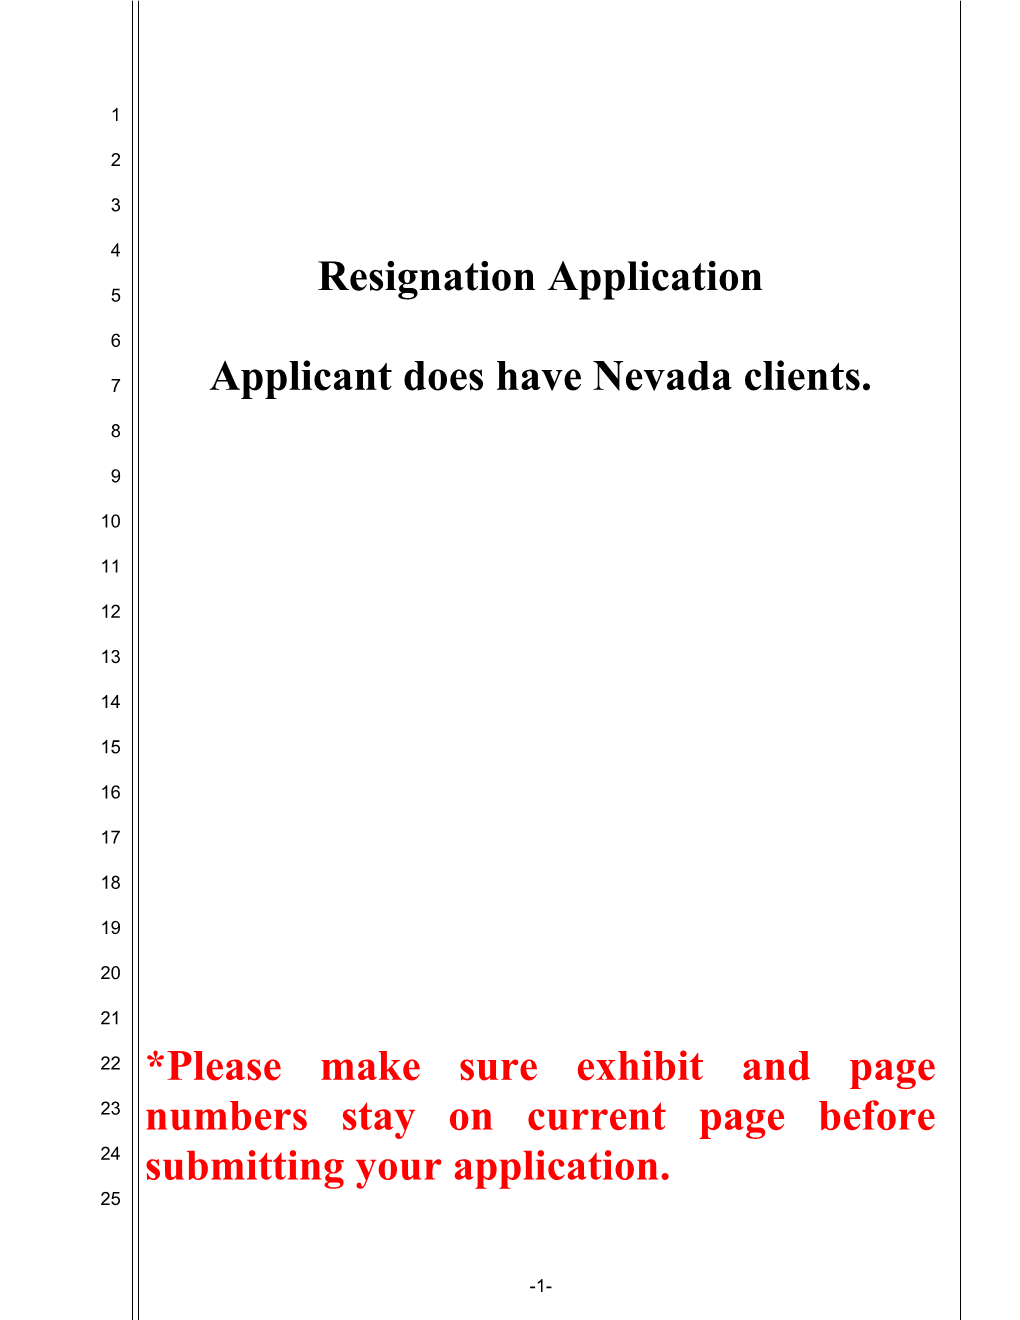 Applicant Does Have Nevada Clients